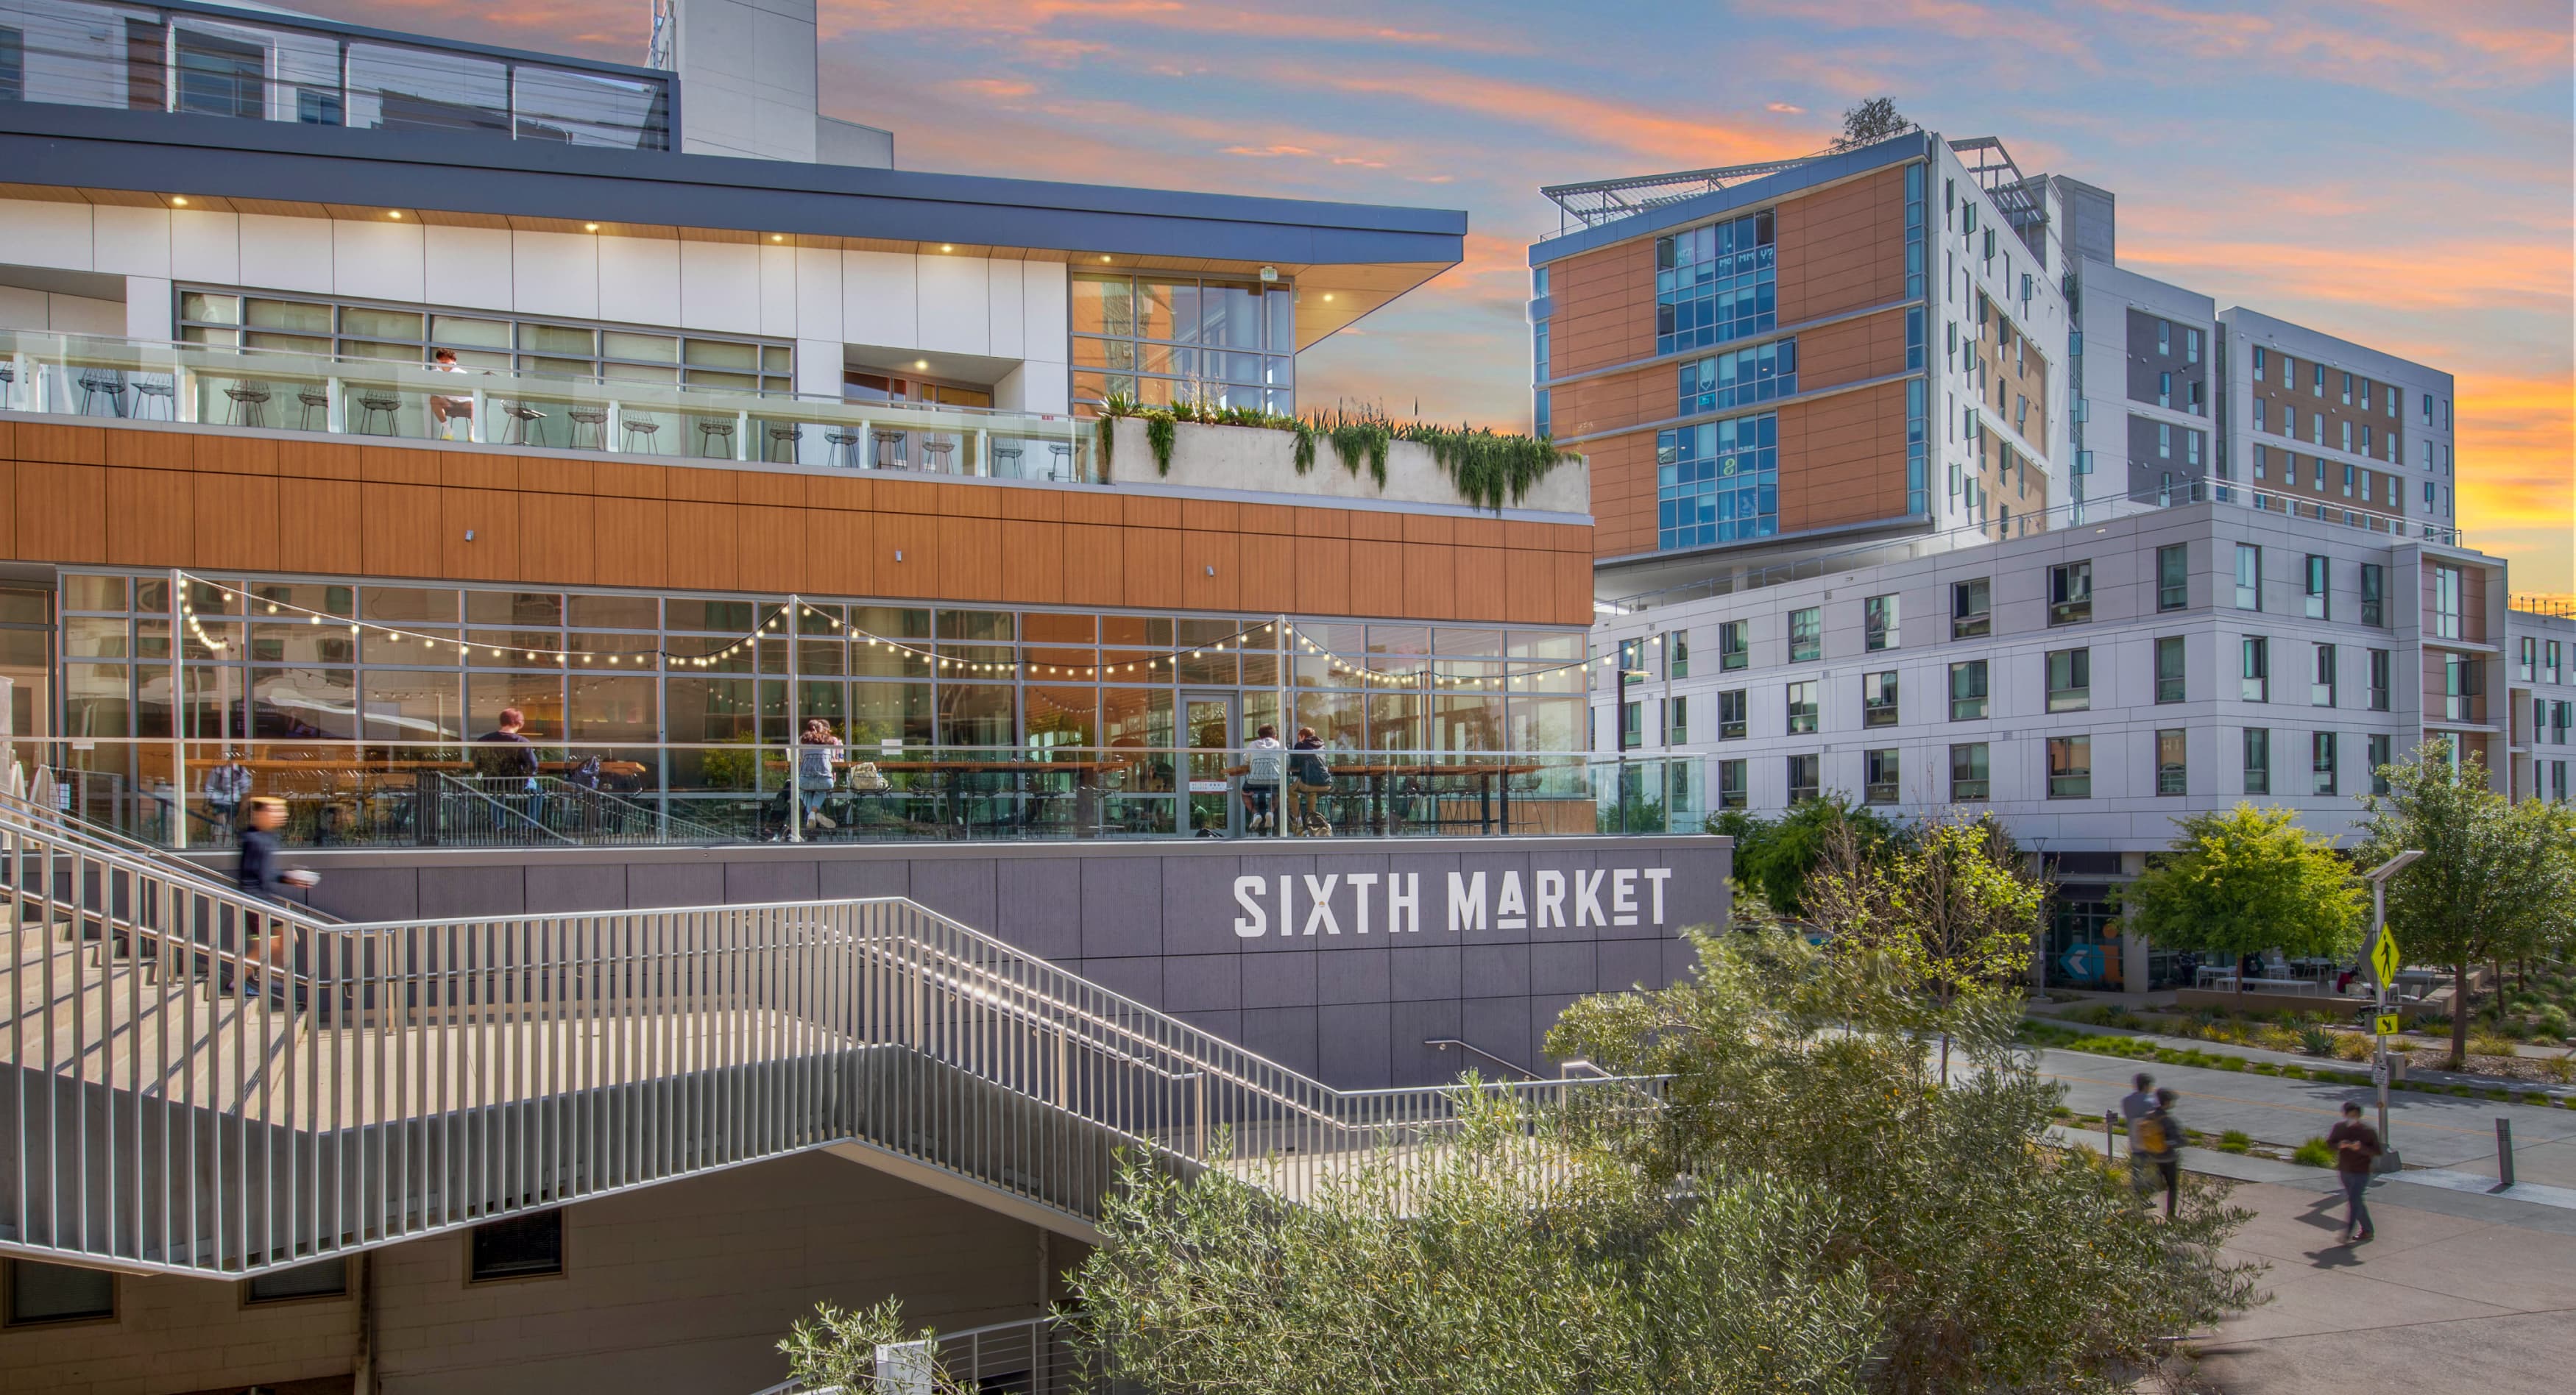 White  "Sixth Market" dimensional project identity signage mounted to wall for UC San Diego by RSM Design in San Diego, California.